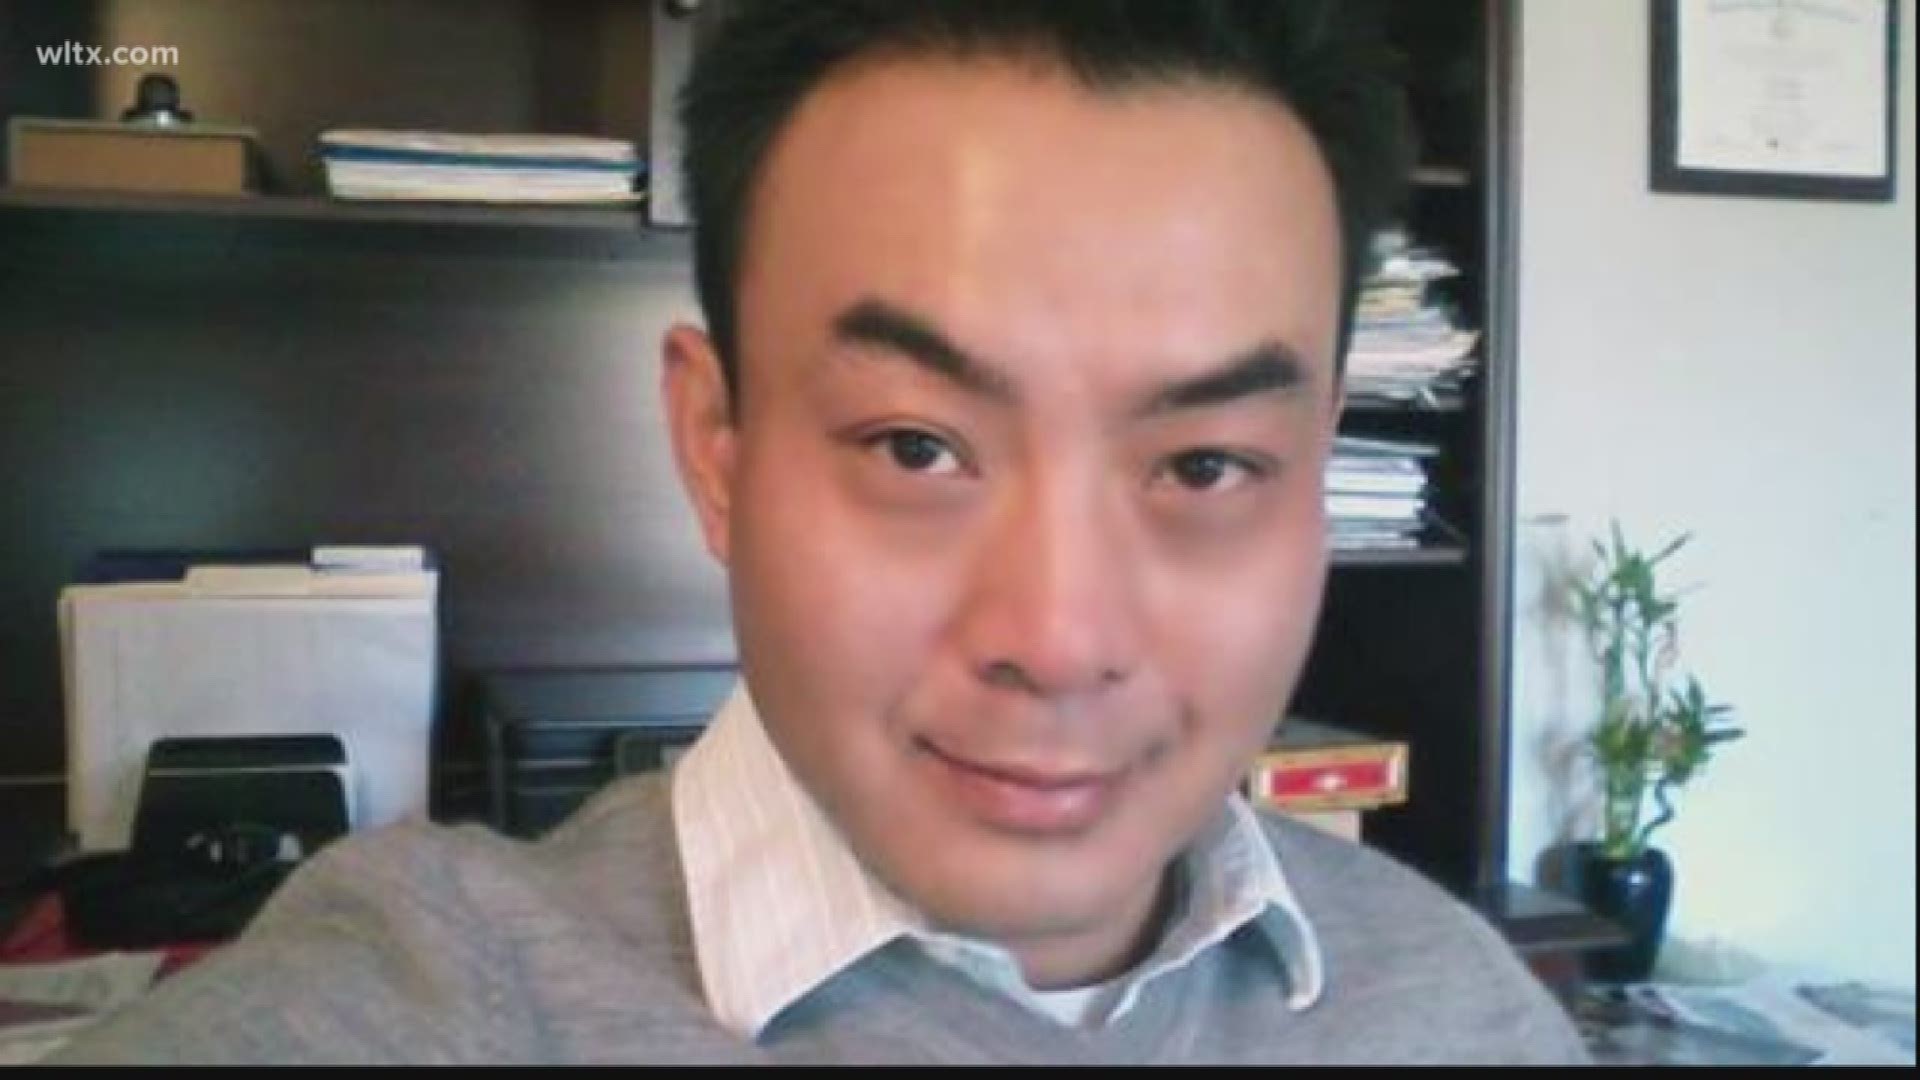 Friends are remembering 42-year-old Tao Gao of Irmo.